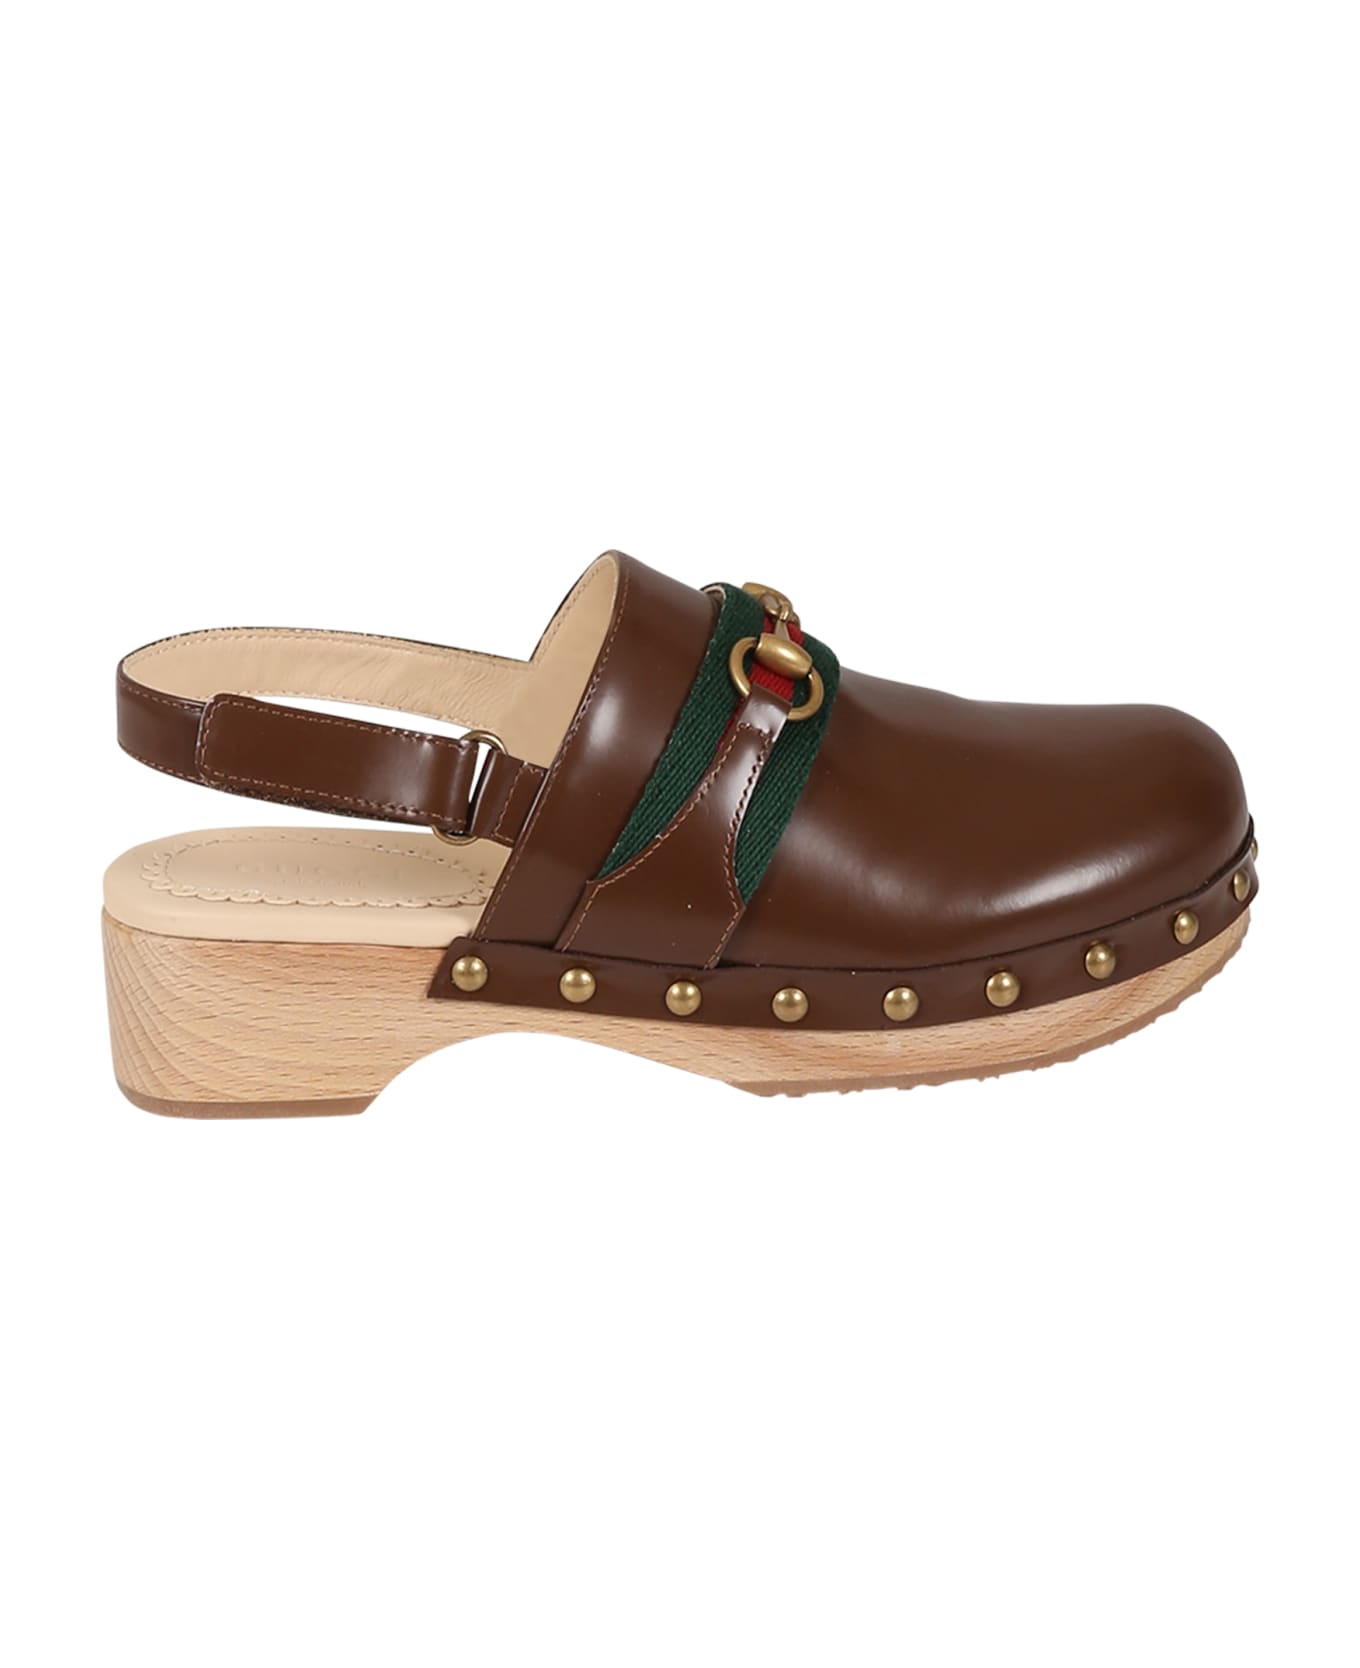 Gucci Bown Sabot For Girl With Iconic Horsebit - Brown シューズ